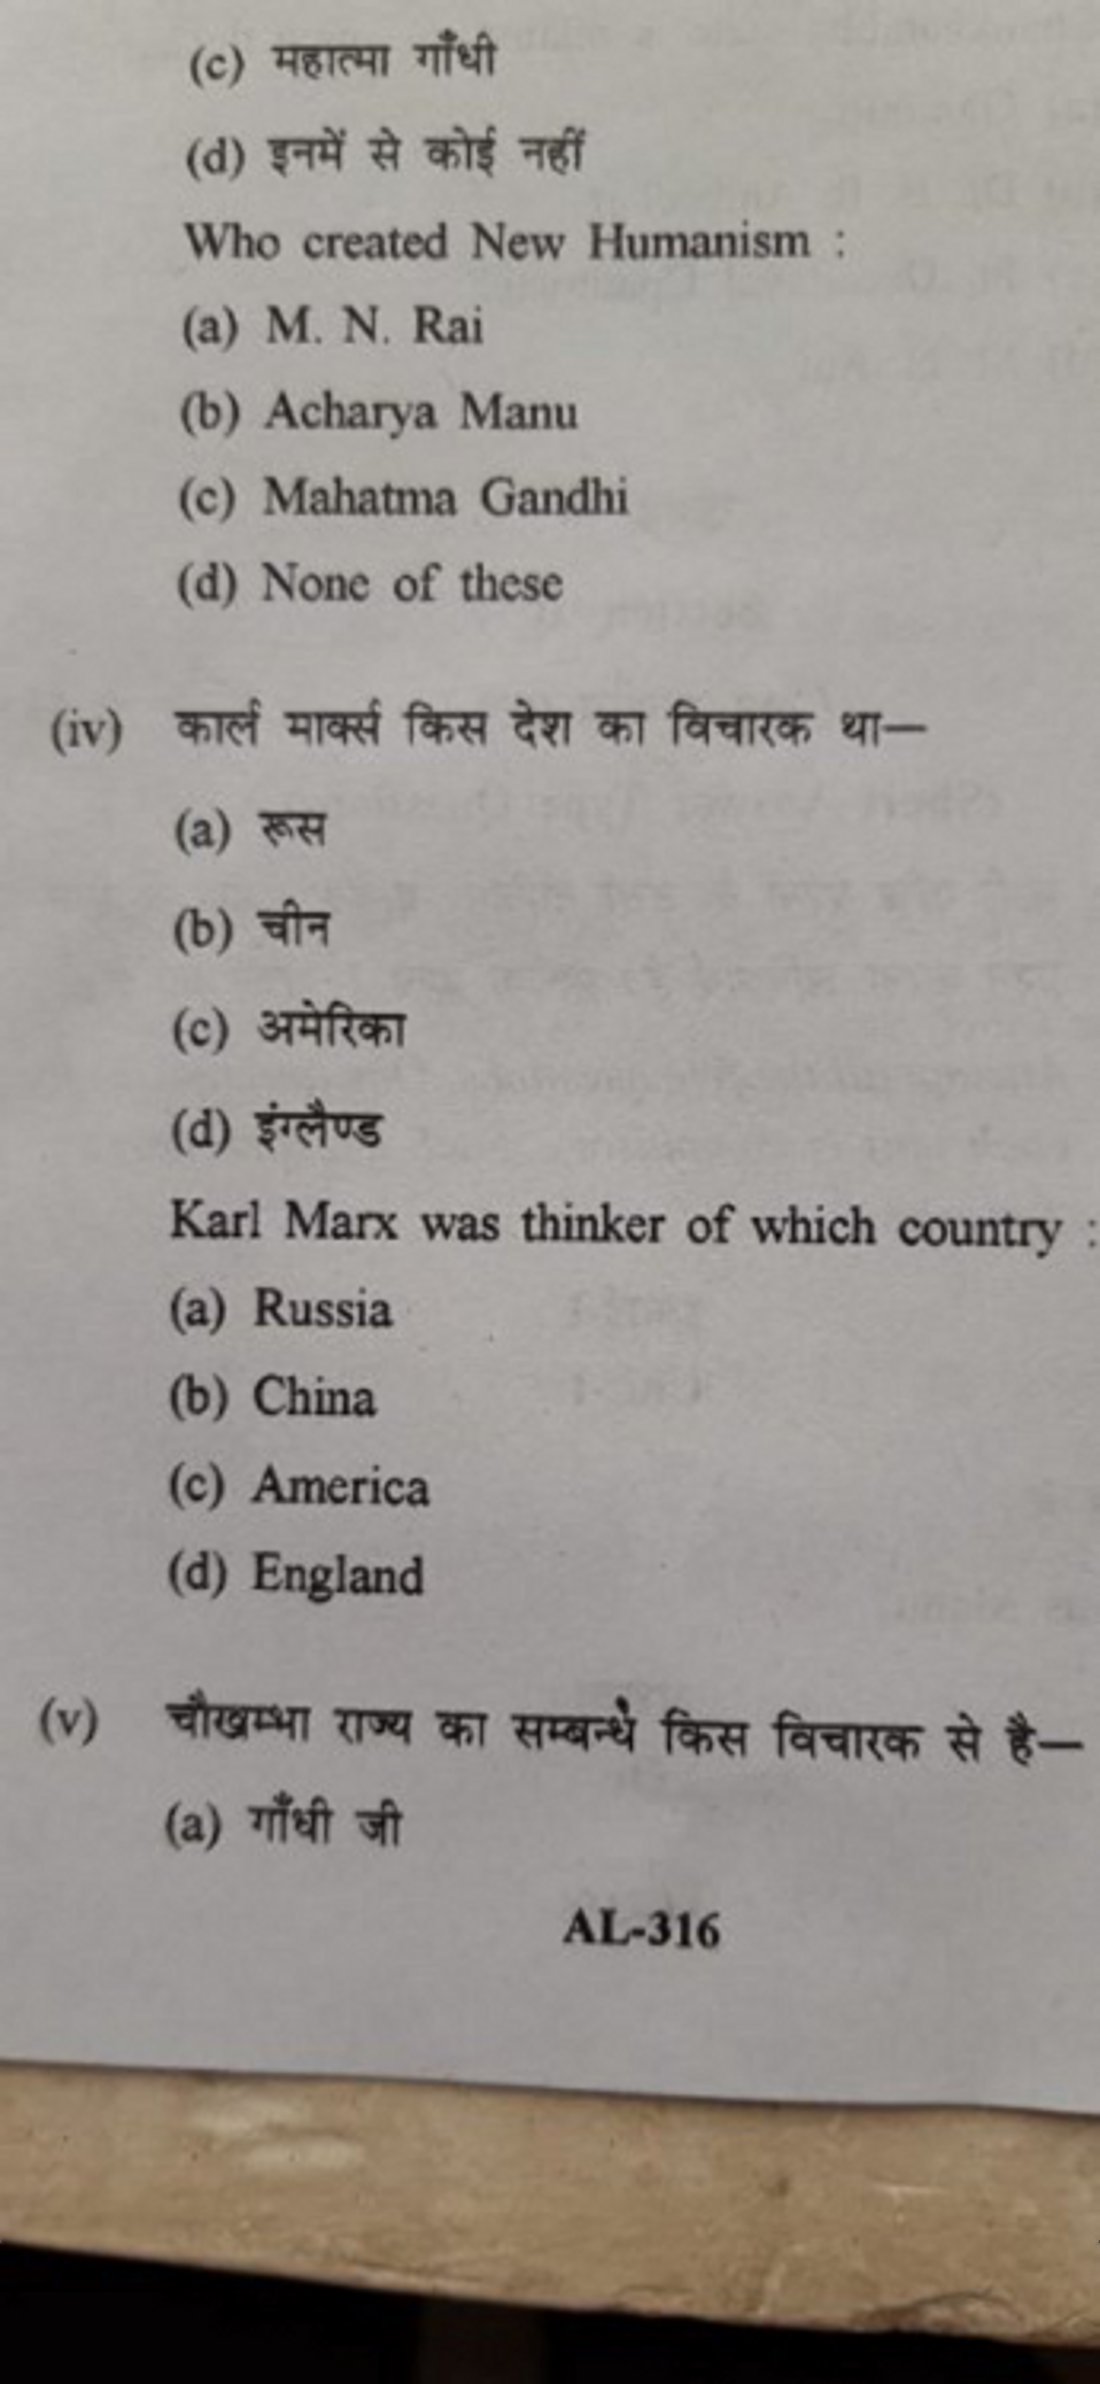 Chhattarpur University's Political Science question papers found big d